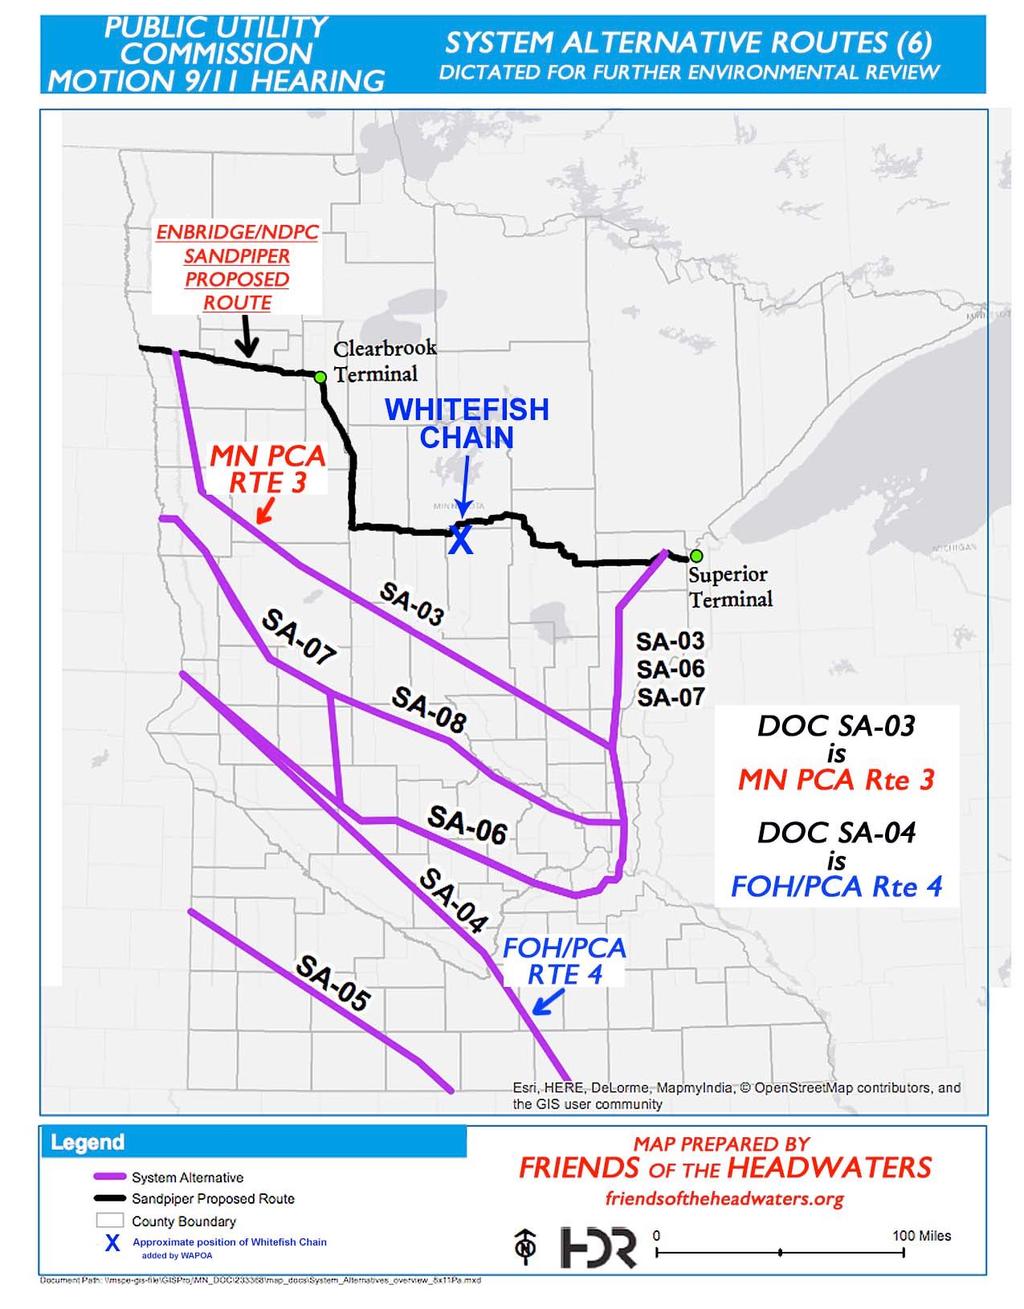 Proposed Sandpiper Pipeline Enbridge, a Canadian company, has proposed a new 30-inch pipeline which will carry crude oil.